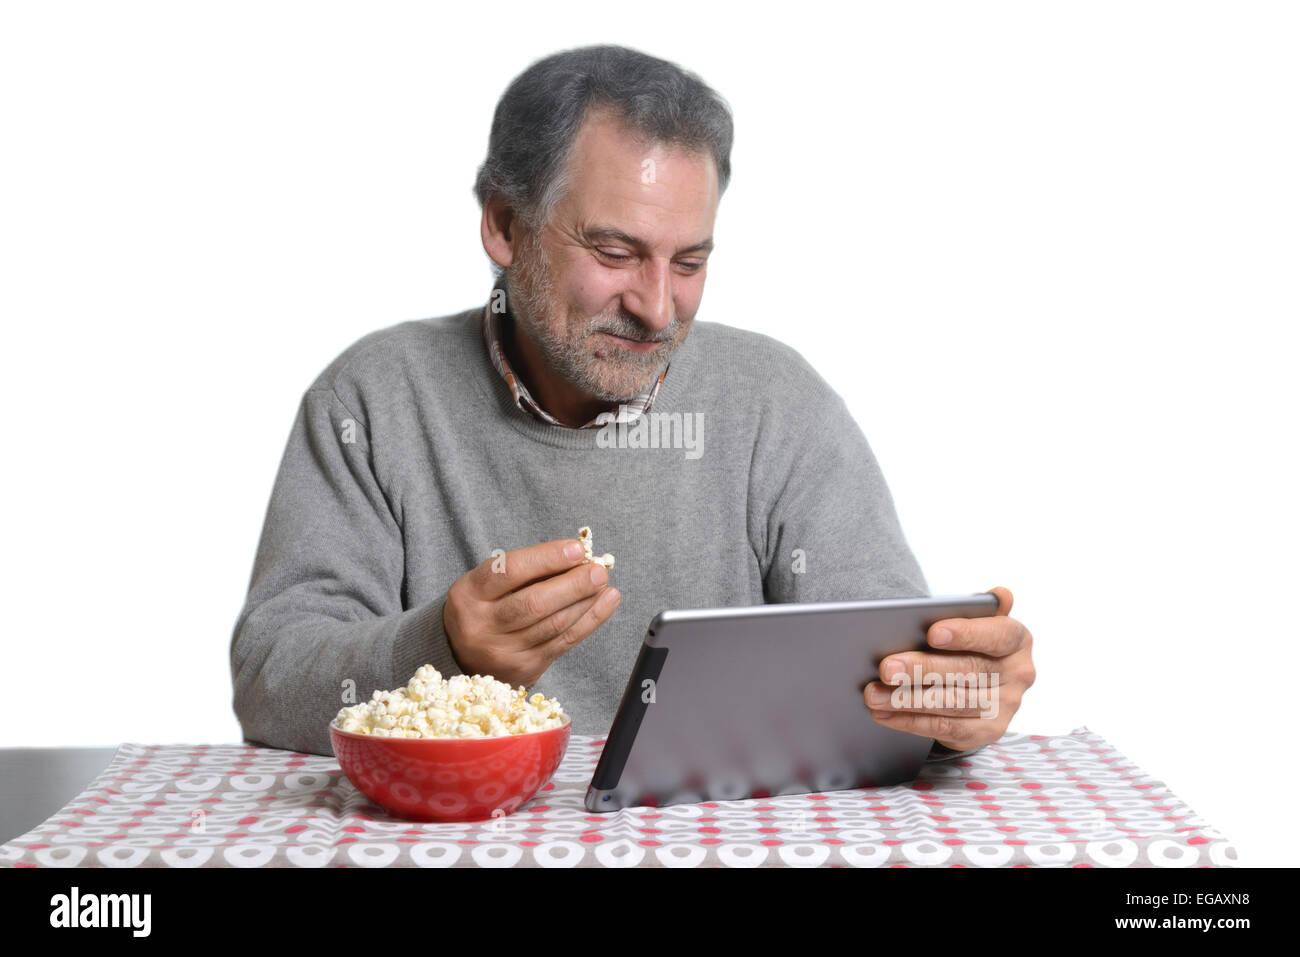 middle-aged-man-using-a-tablet-computer-while-eating-popcorn-at-home-EGAXN8.jpg